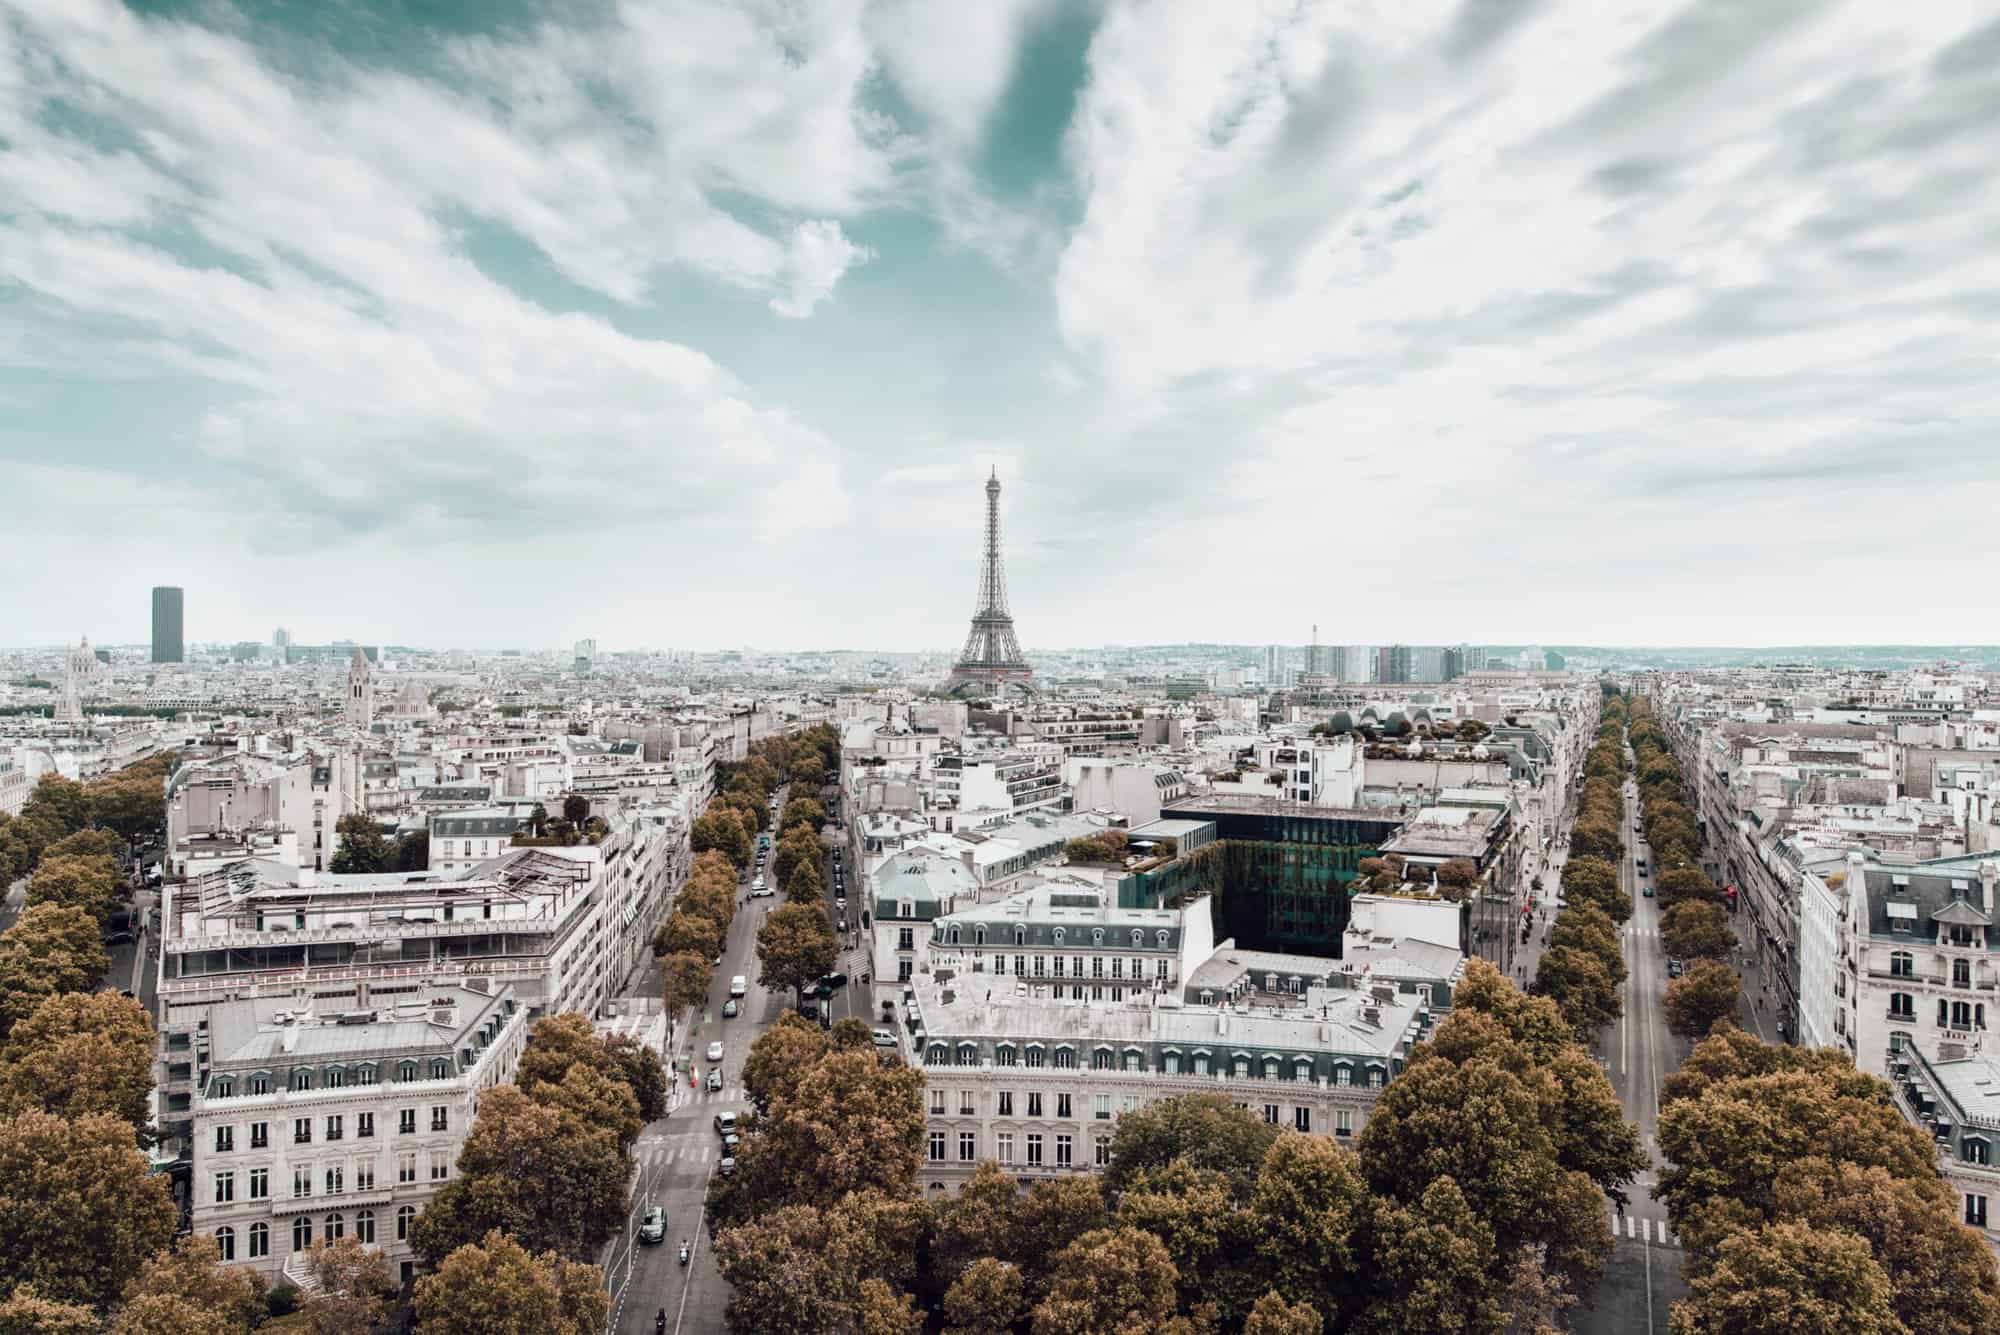 View from the Arc de Triomphe of the Champs Elysees and the Eiffel Tower.